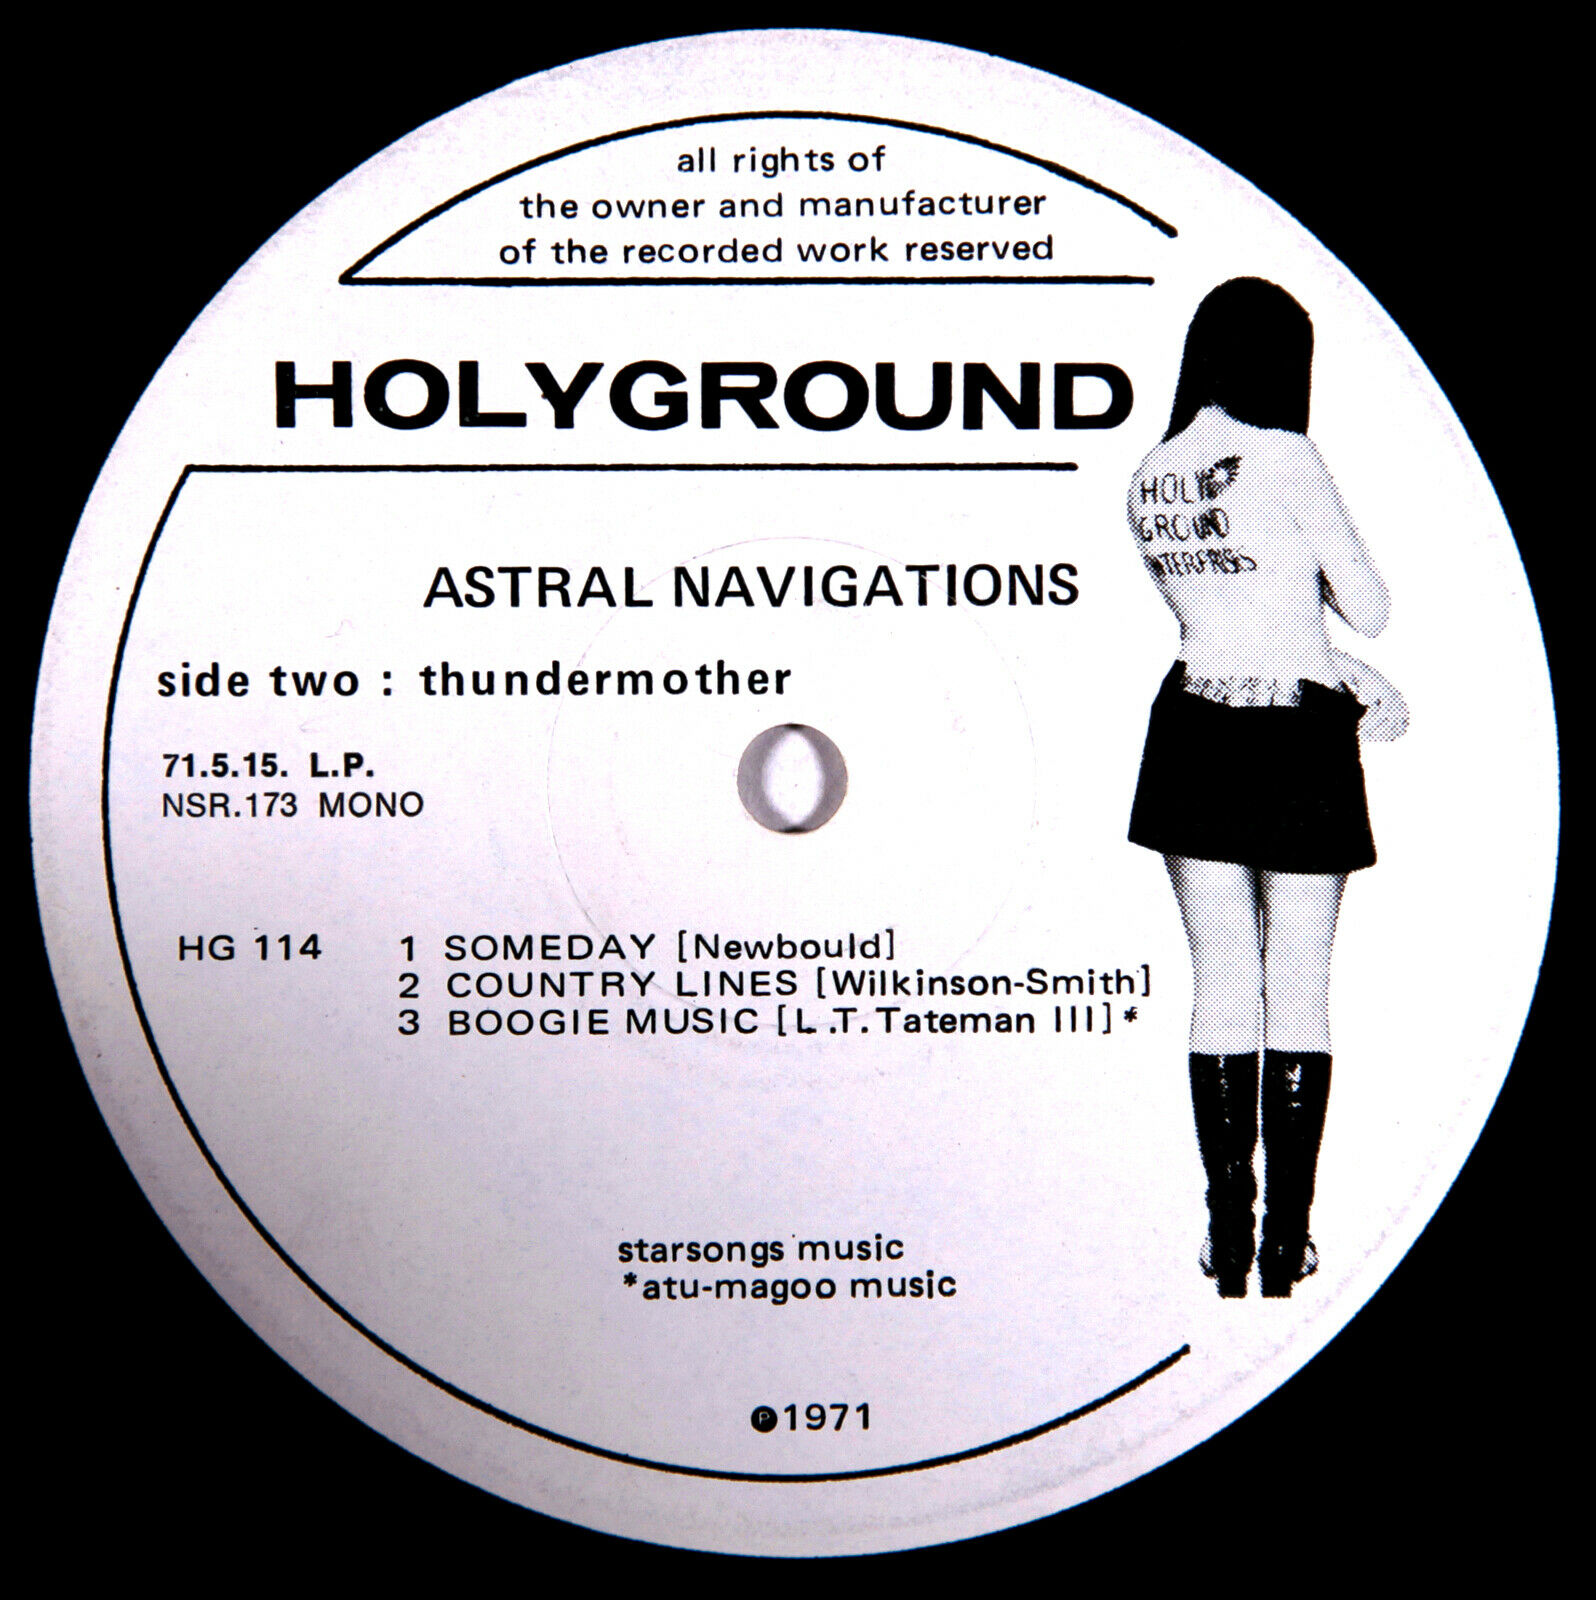 Pic 3 ASTRAL NAVIGATIONS LP on Holyground Rare Original 1971 UK Psych Thundermother M-